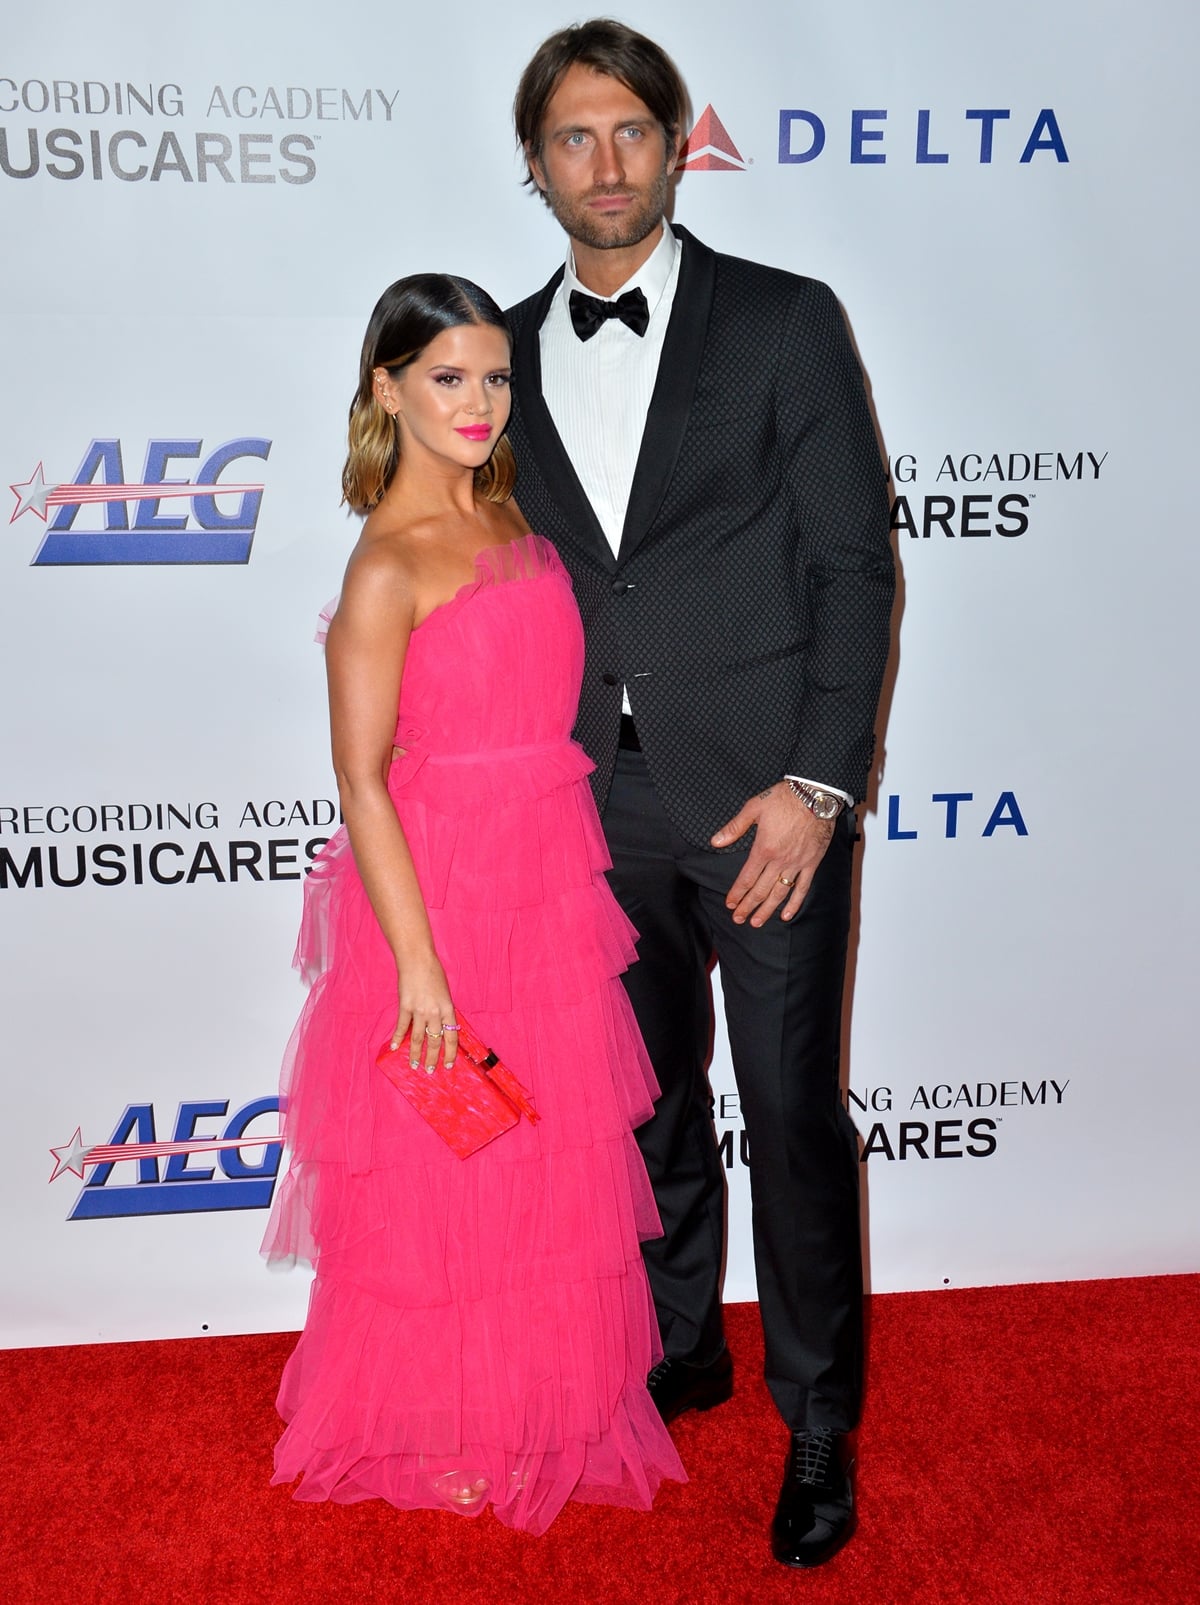 Maren Morris in a pink Carolina Herrera dress with an Edie Parker clutch, and jewelry by Luisa Alexander, KatKim, and Beladora with her husband Ryan James Hurd on the red carpet at the 2019 MusiCares Person of the Year gala